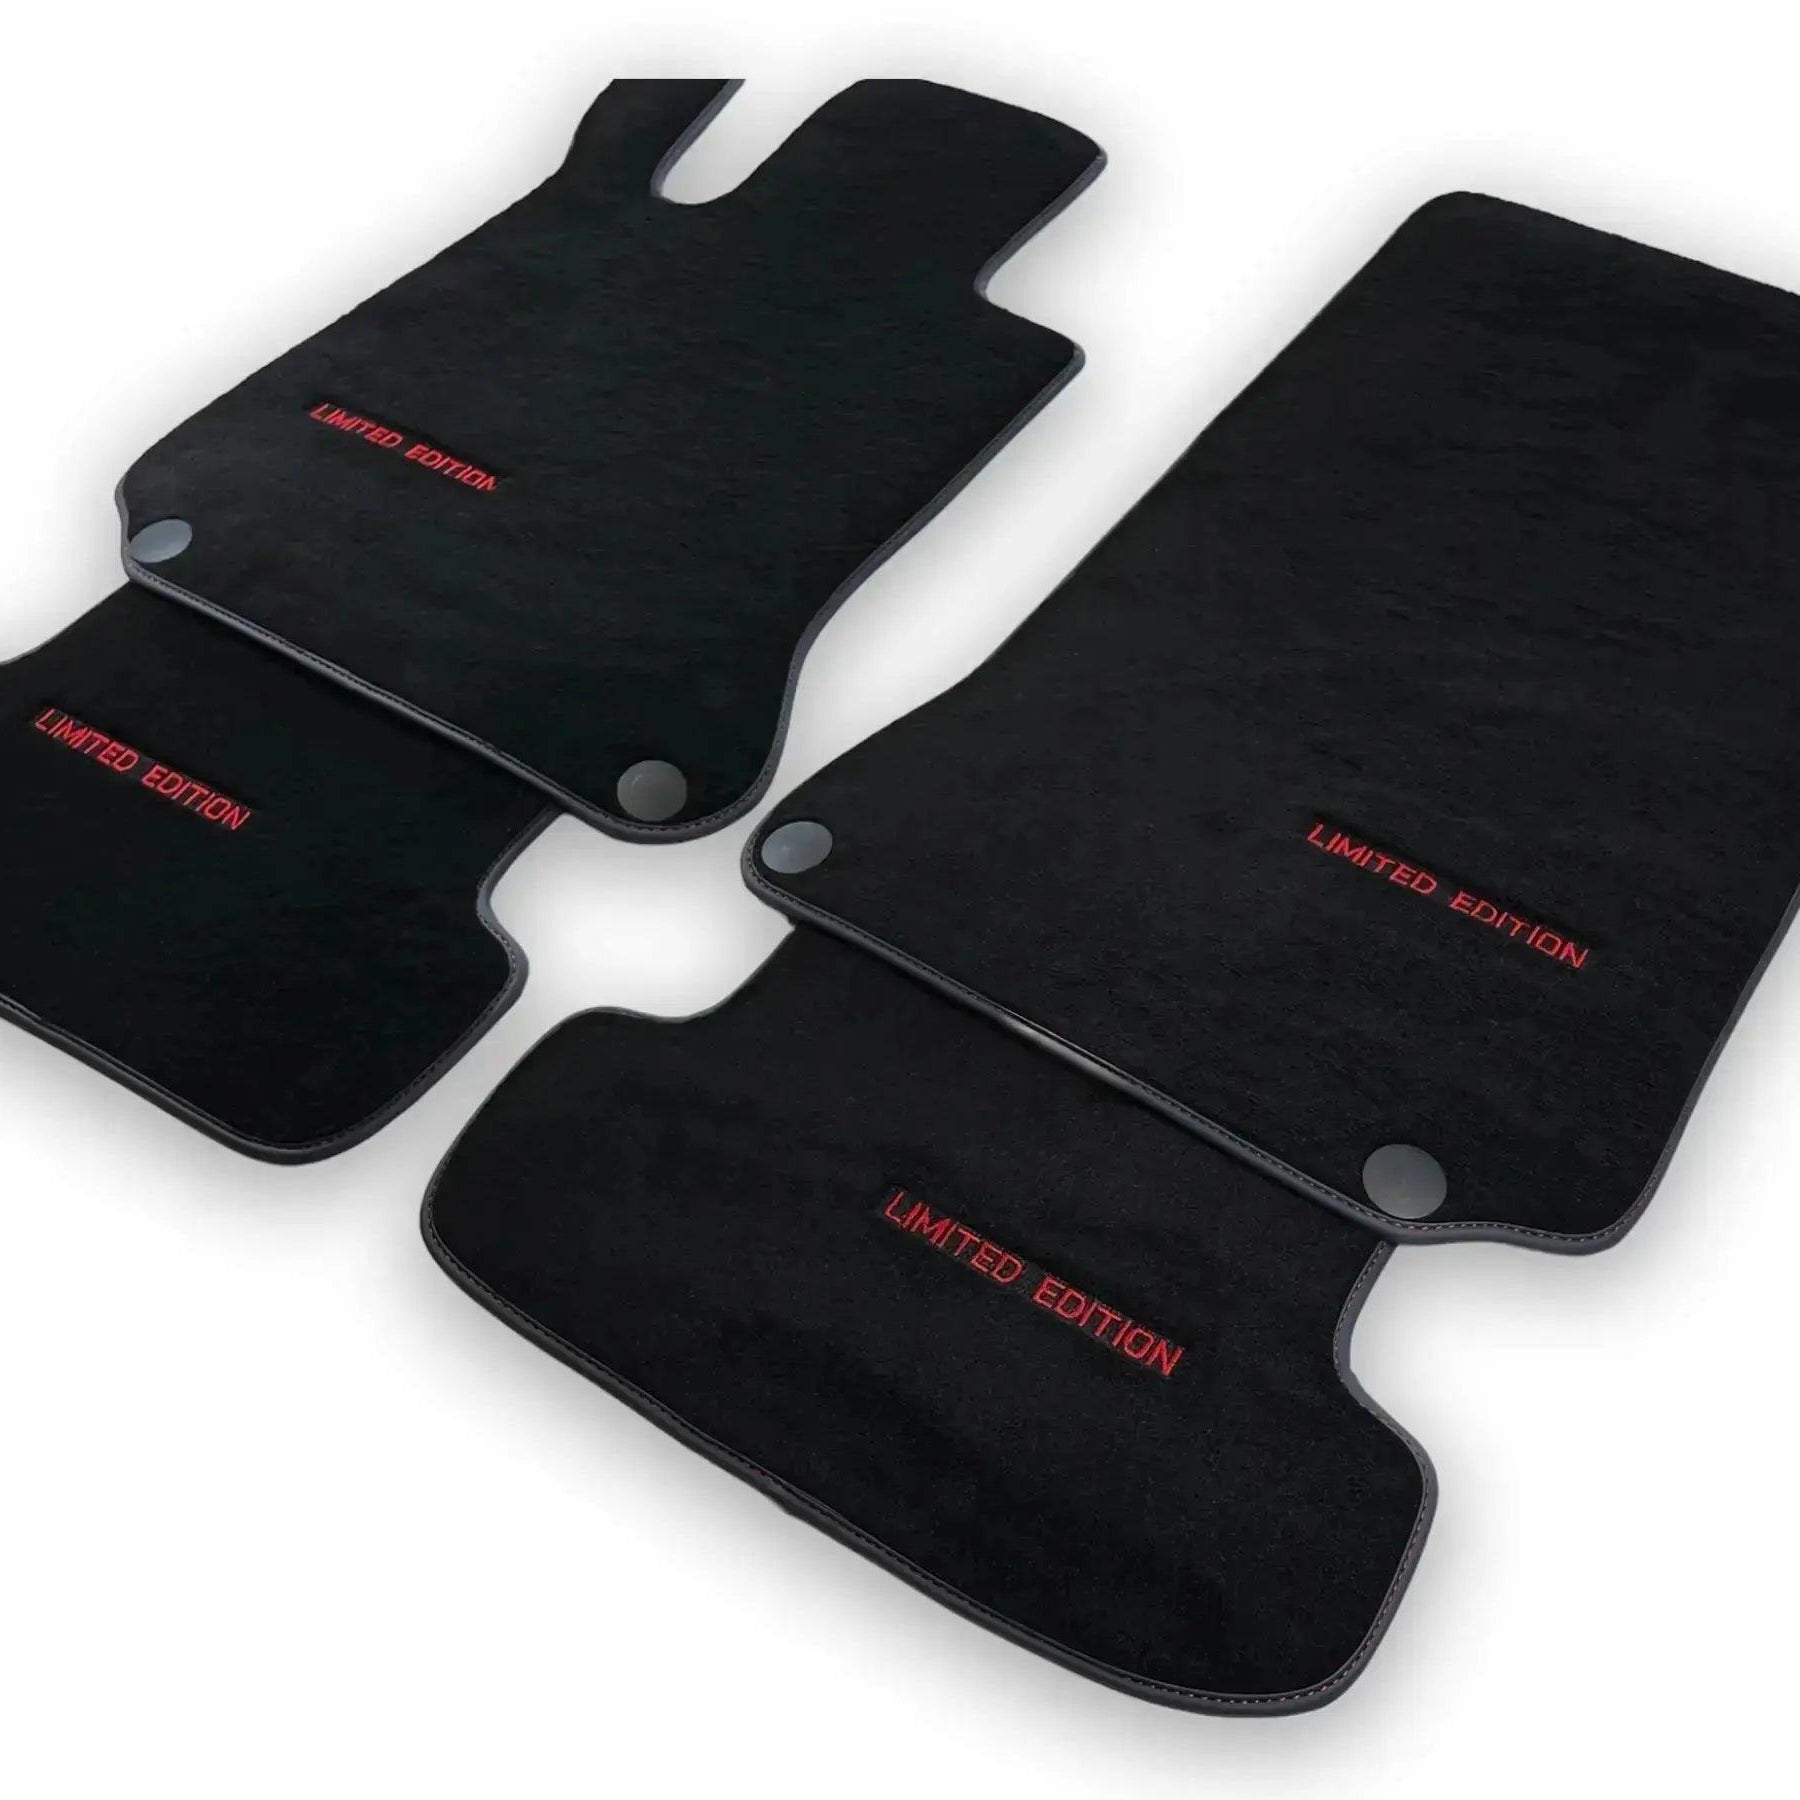 Blue Floor Mats For Mercedes Benz EQC-Class N293 (2019-2023) | Limited Edition